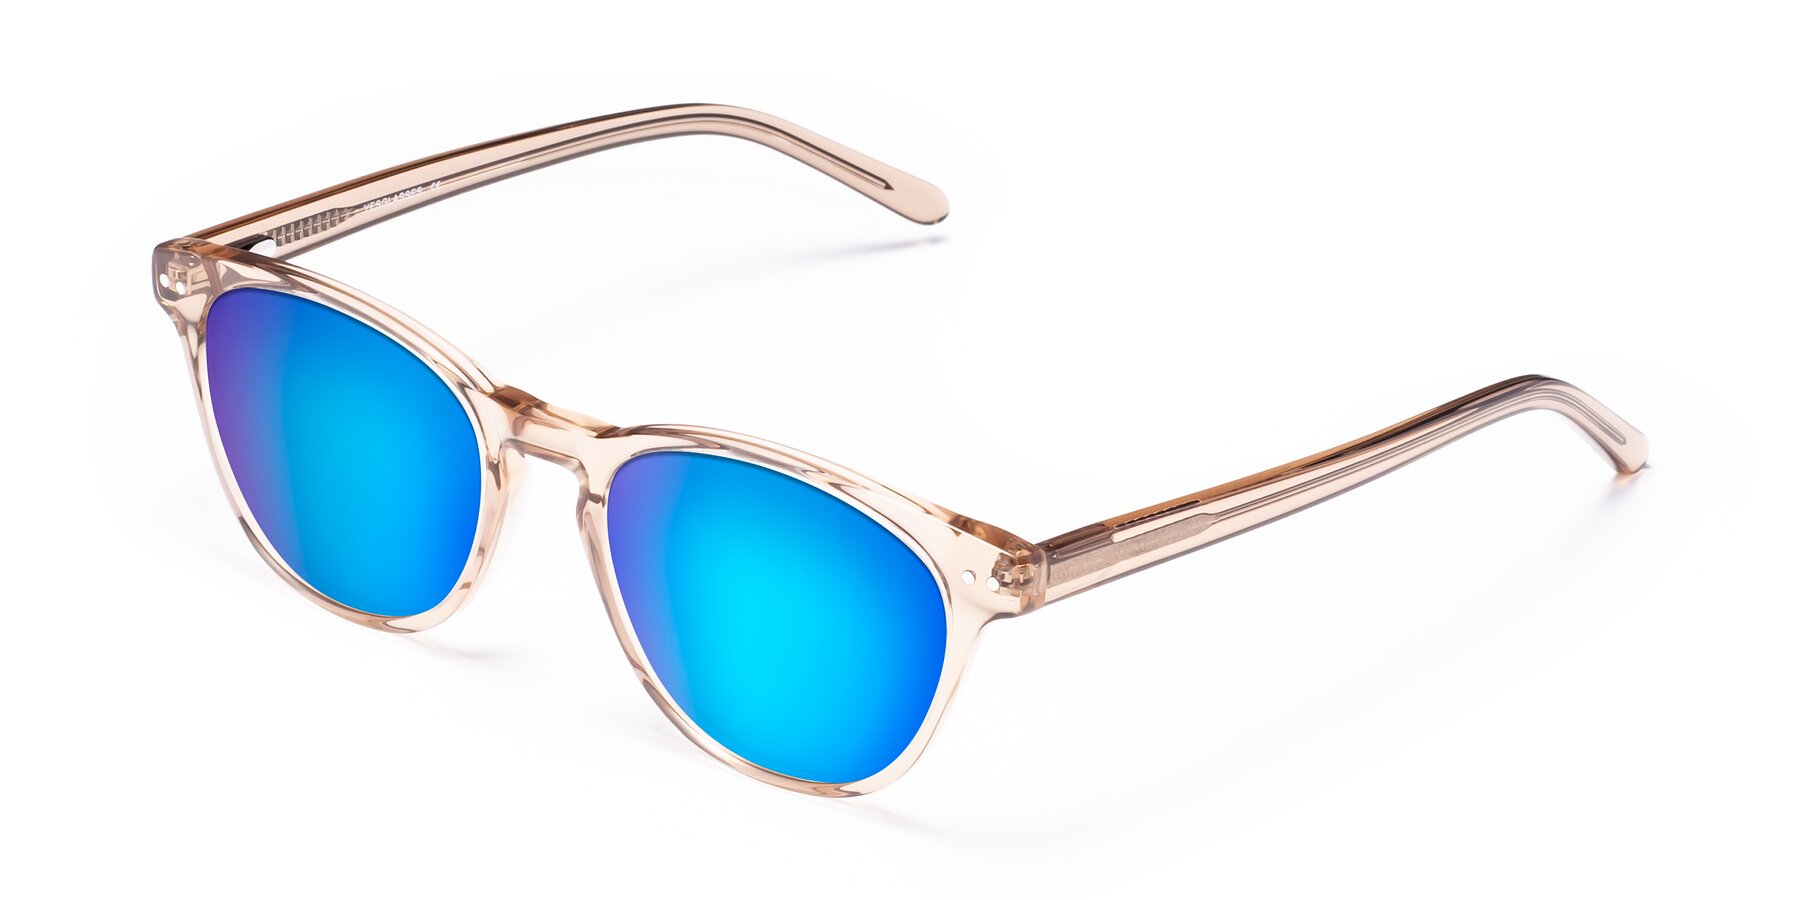 Angle of Blaze in light Brown with Blue Mirrored Lenses